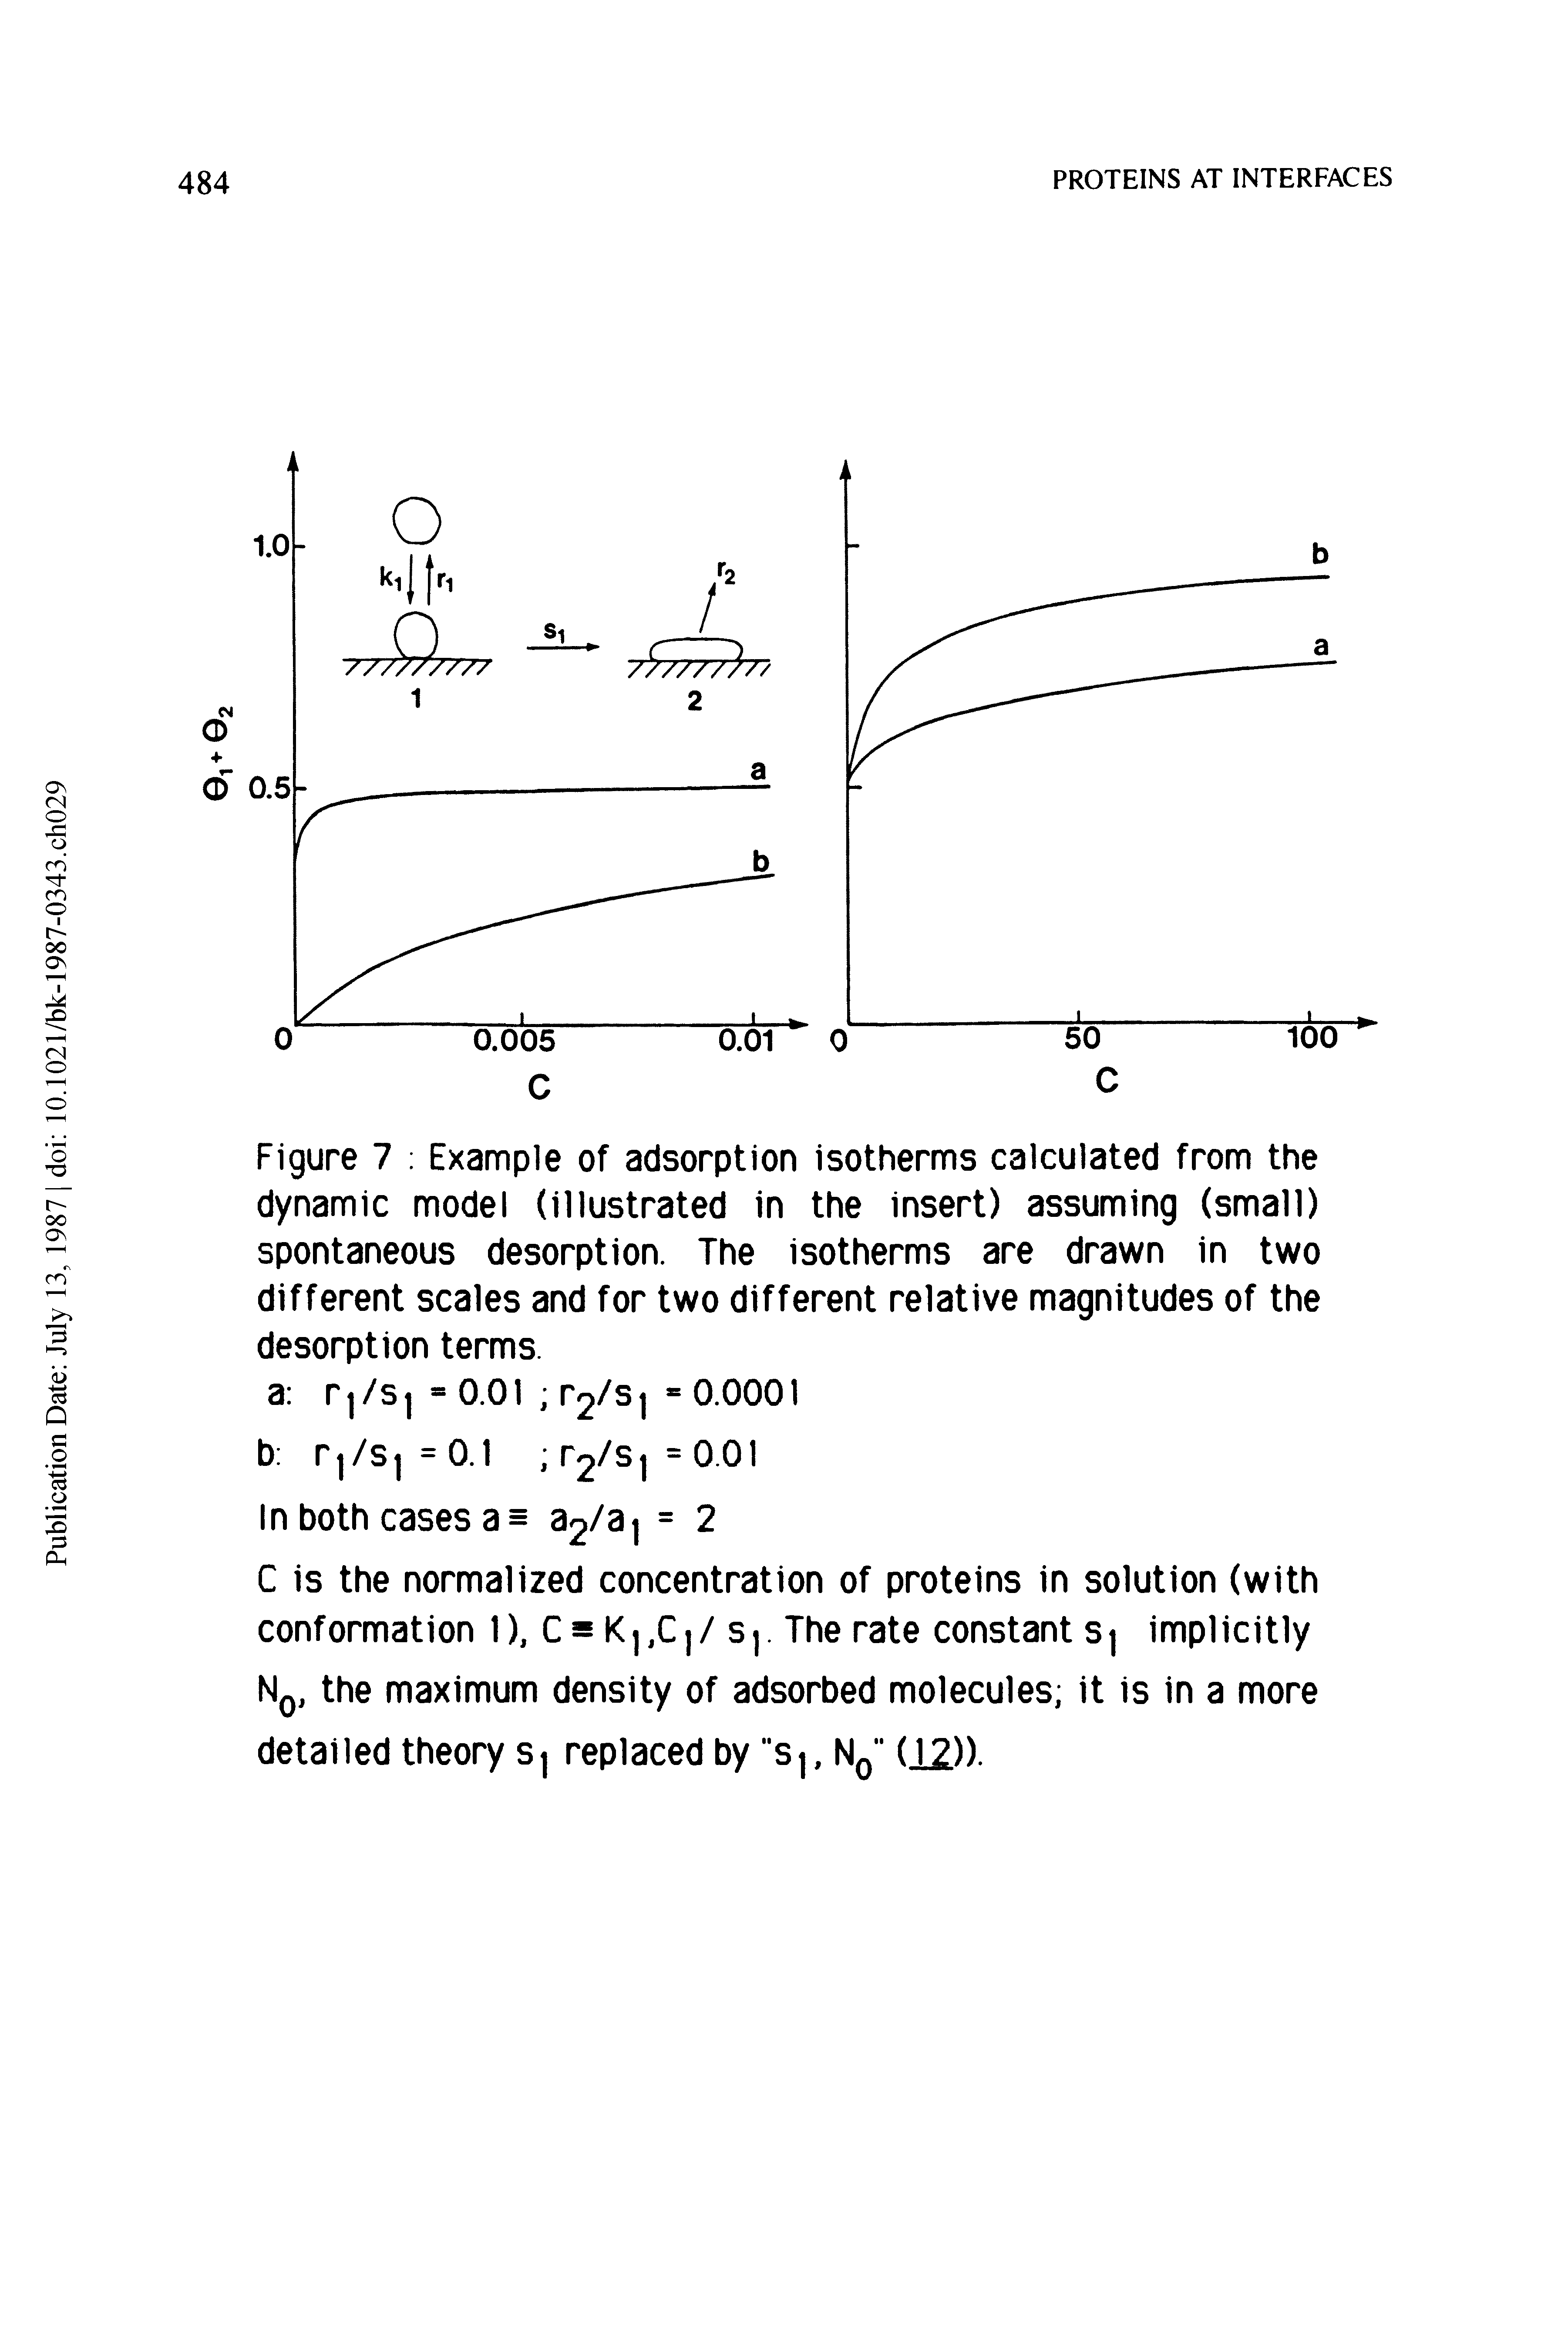 Figure 7 Example of adsorption isotherms calculated from the dynamic model (illustrated in the insert) assuming (small) spontaneous desorption. The isotherms are drawn in two different scales and for two different relative magnitudes of the desorption terms.